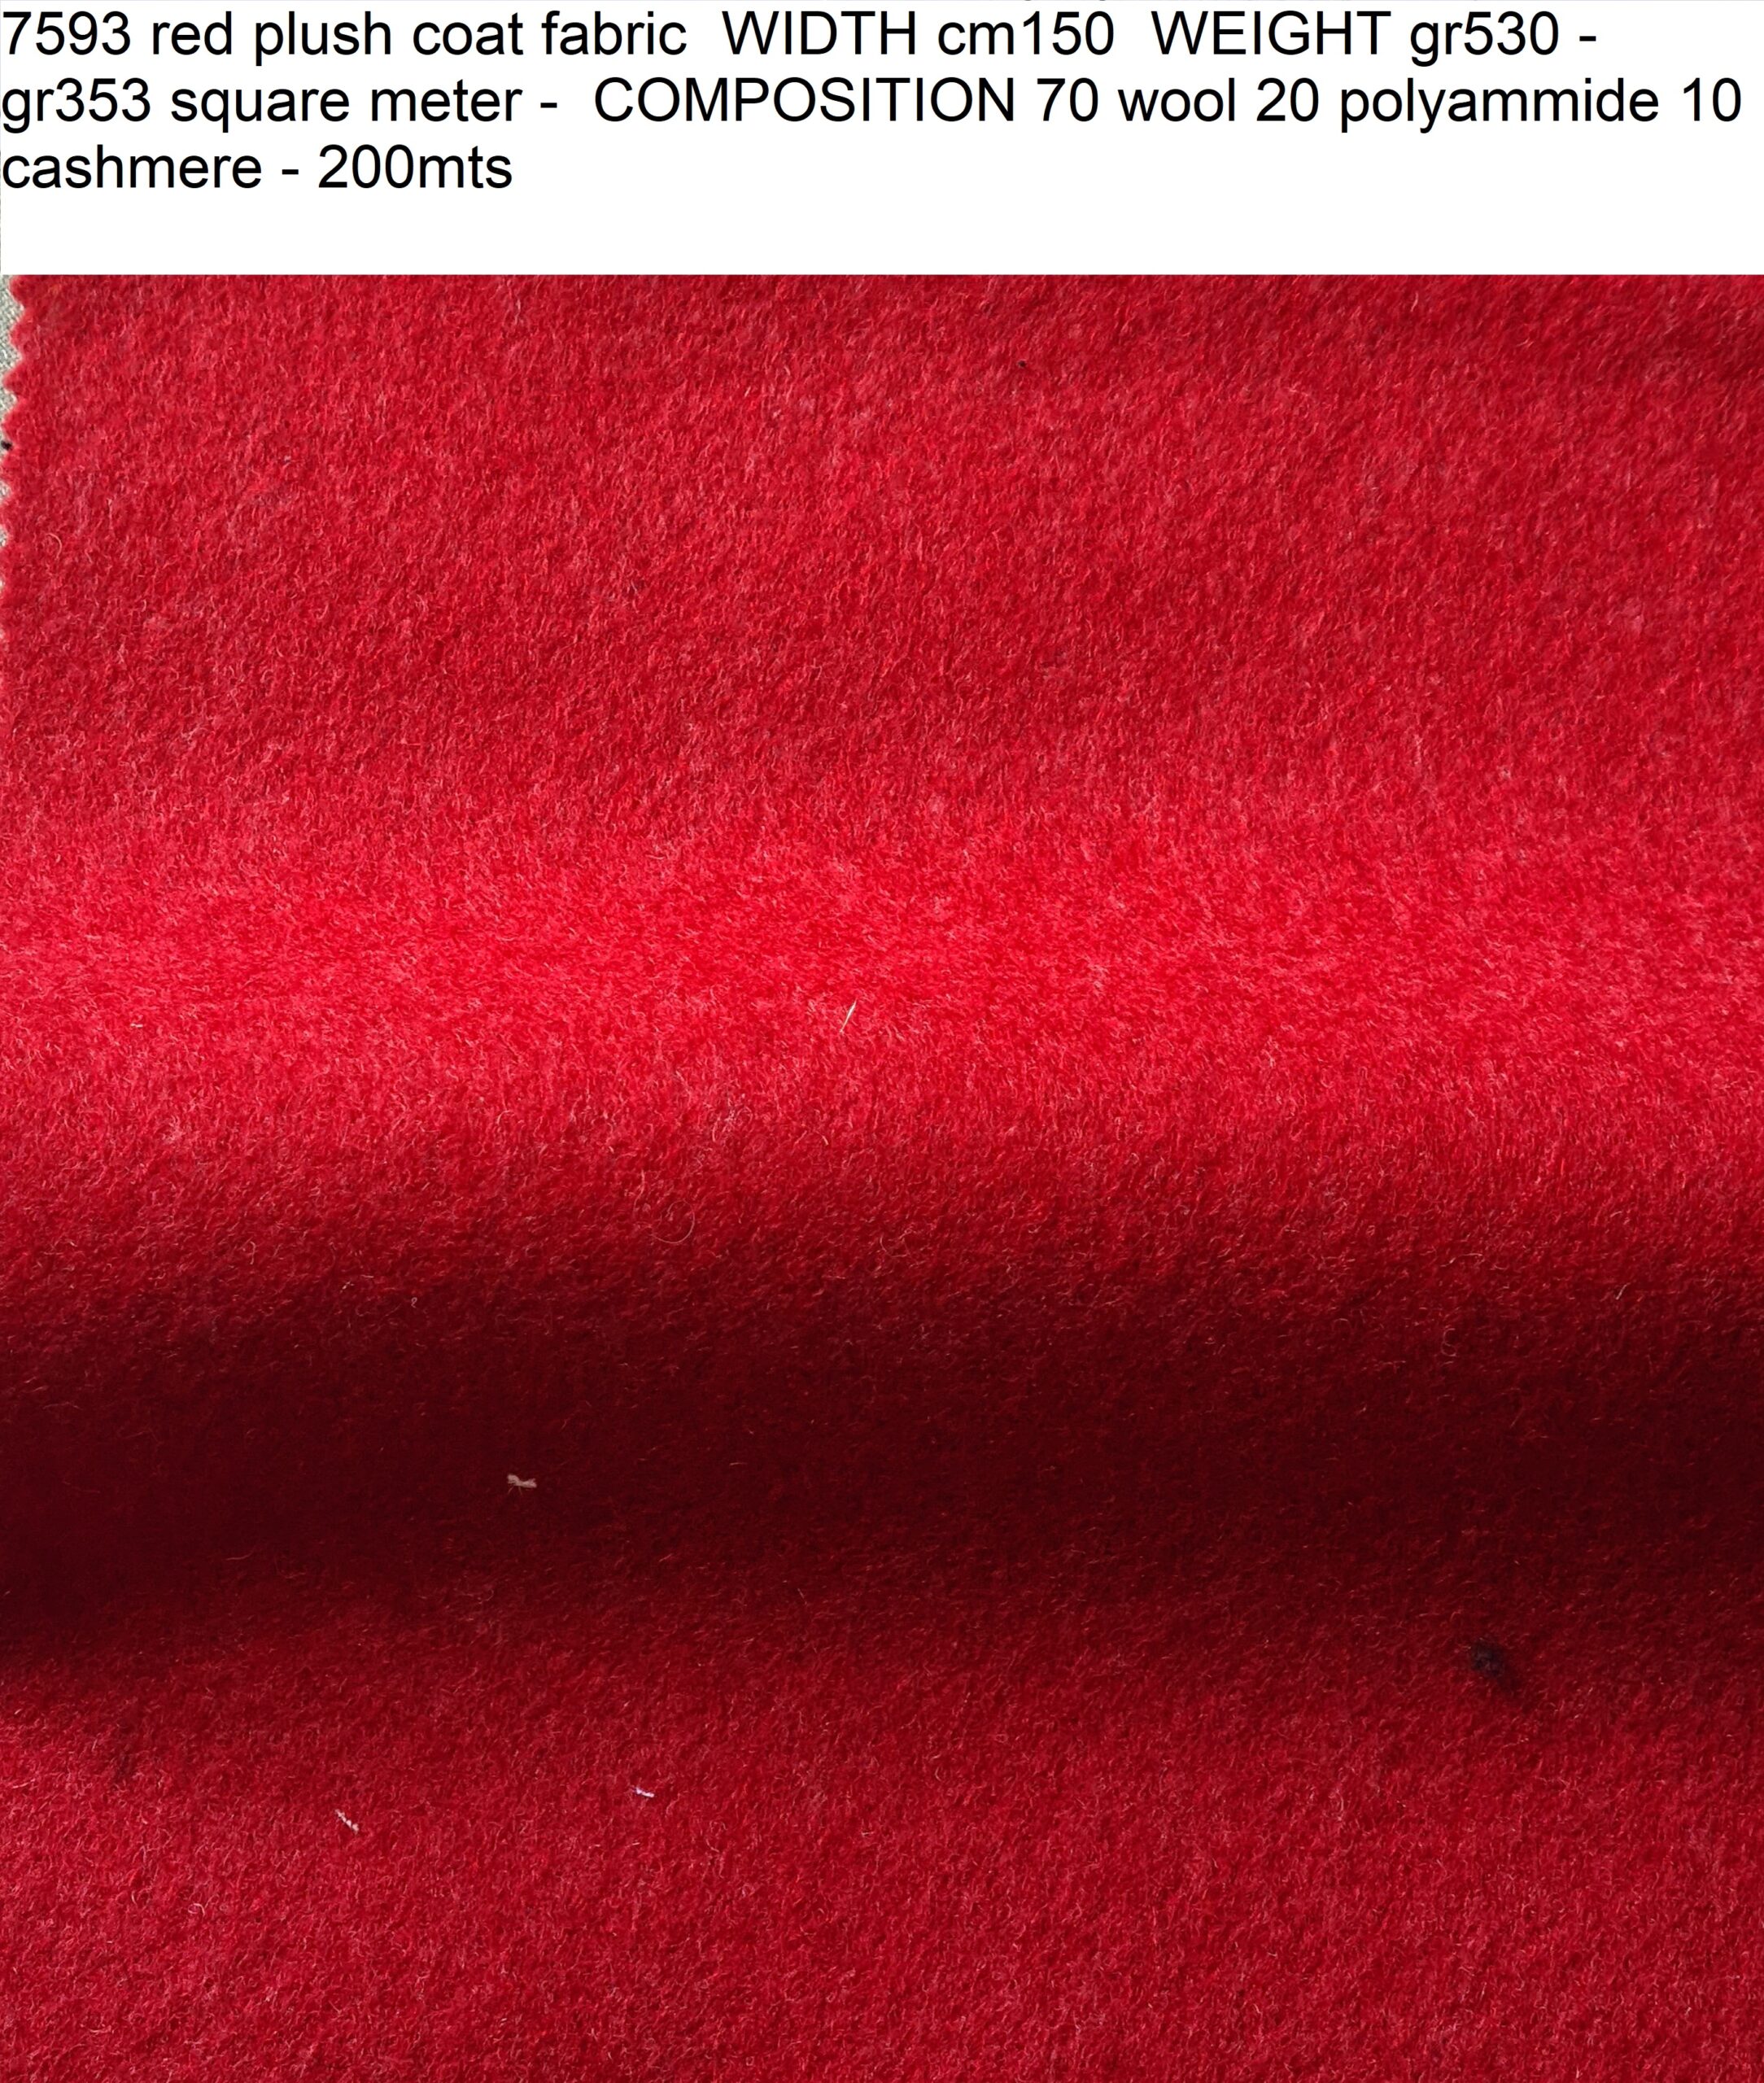 7593 red plush coat fabric WIDTH cm150 WEIGHT gr530 - gr353 square meter - COMPOSITION 70 wool 20 polyammide 10 cashmere - 200mts